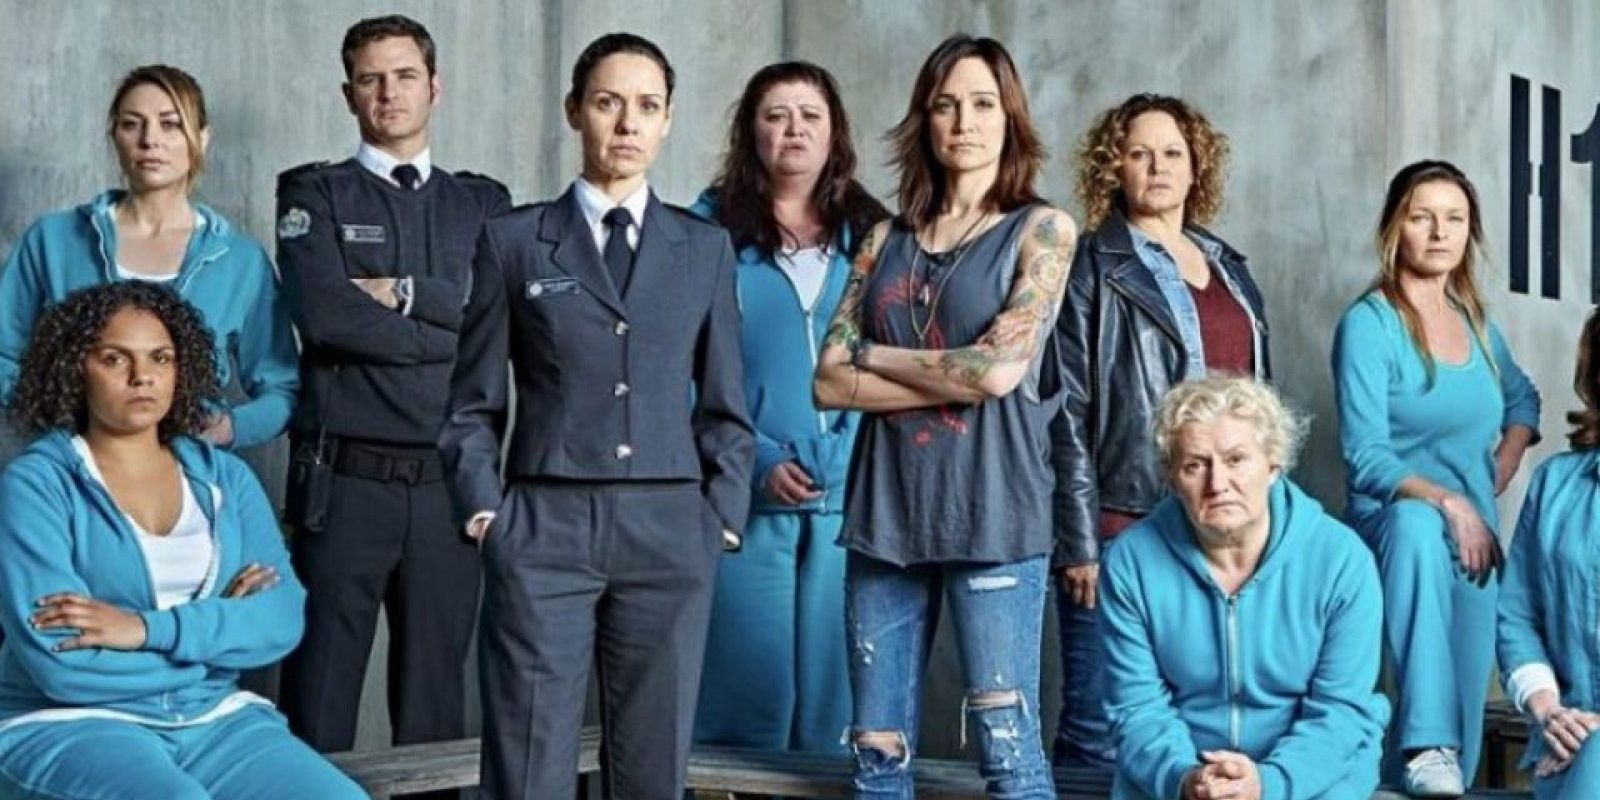 Cast of guards and prisoners on Netflix Australian show Wentworth